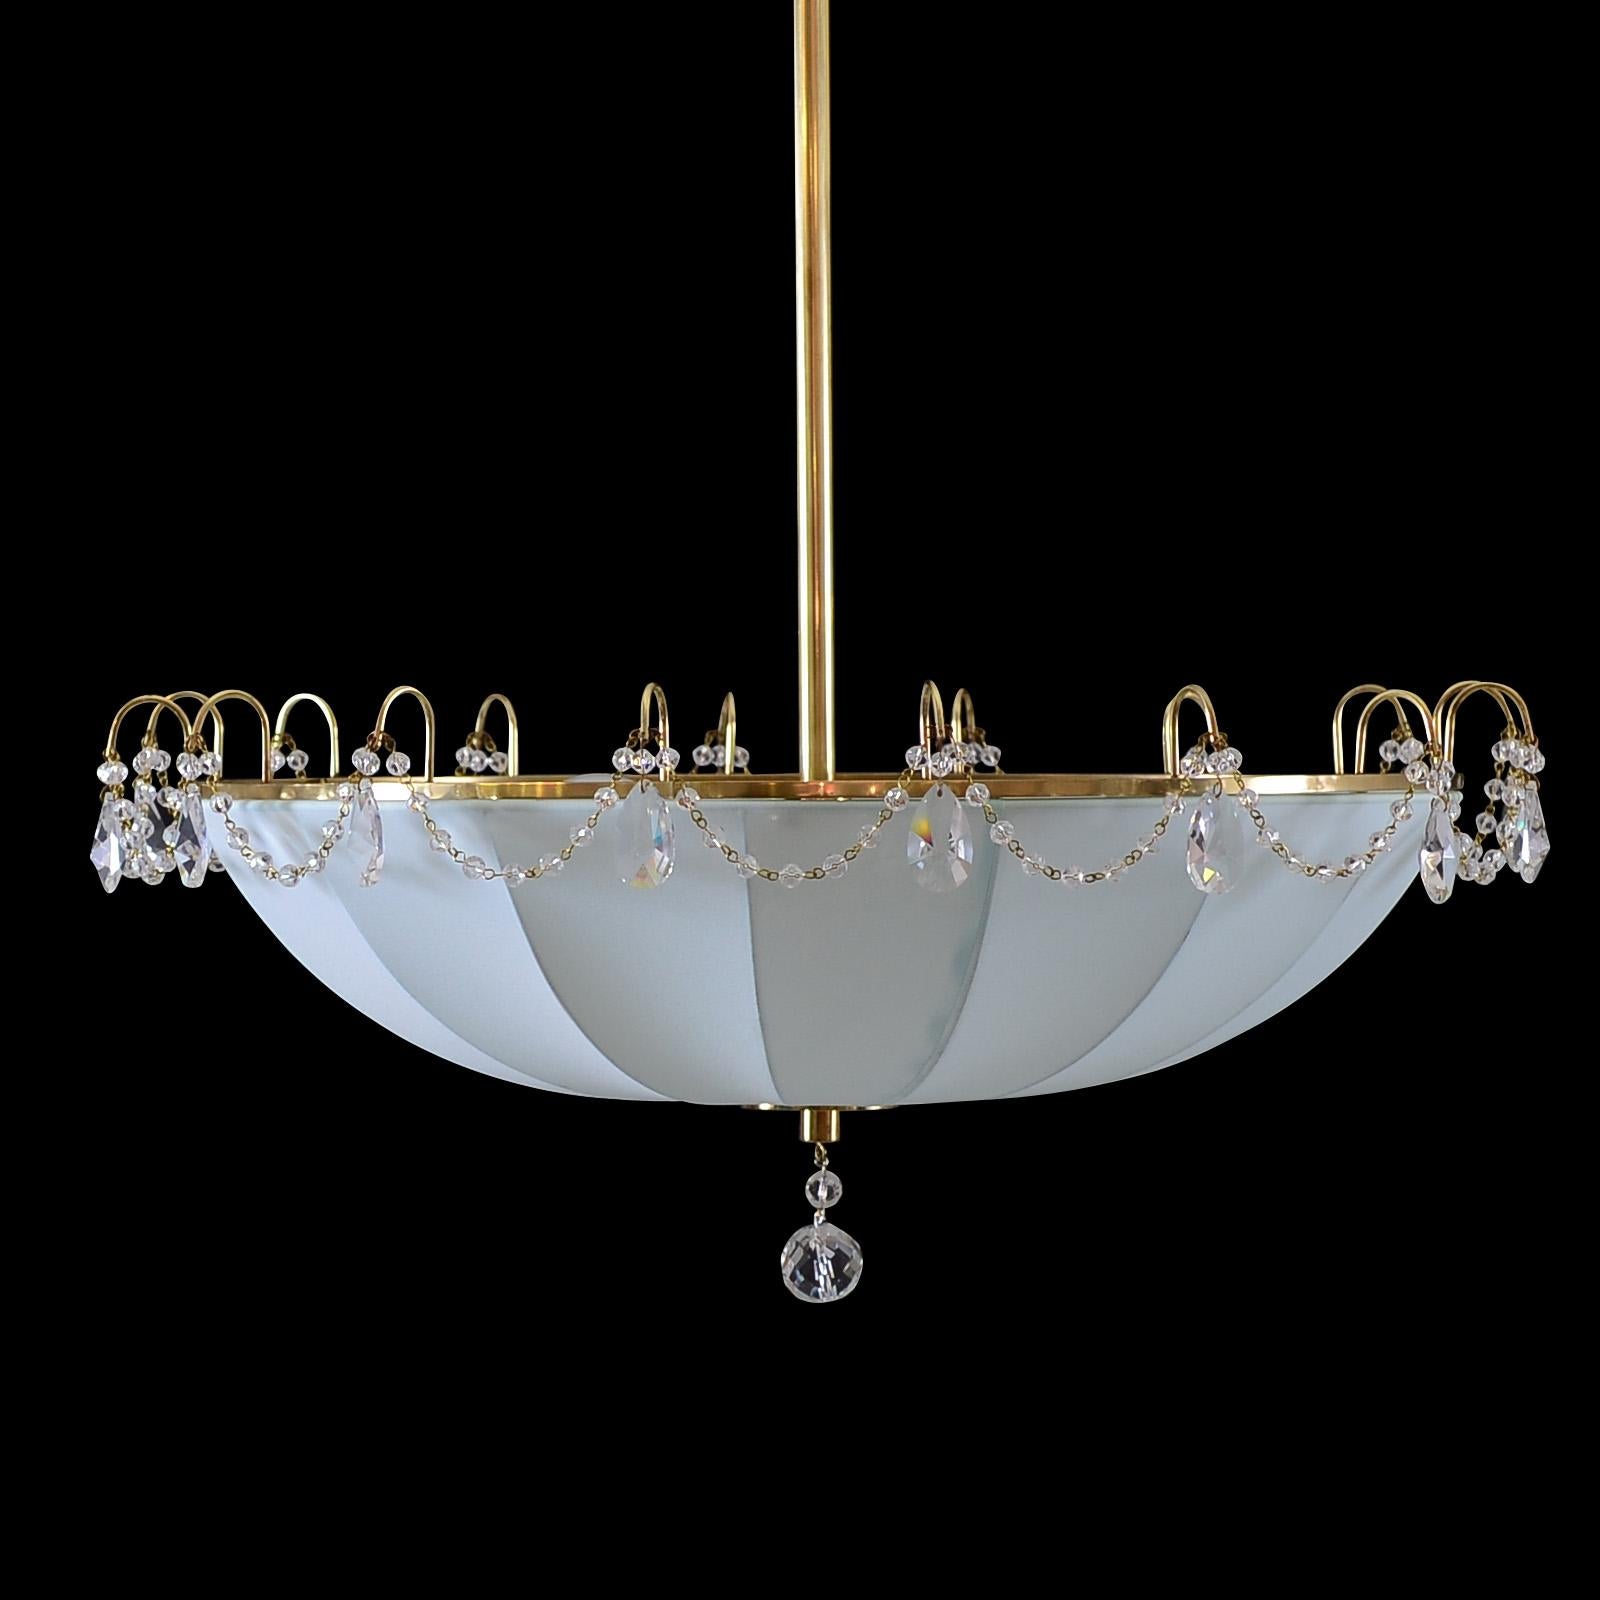 Austrian Mid-Century Modern Style Silk and Crystal Glass Umbrella Chandelier, Re-Edition For Sale